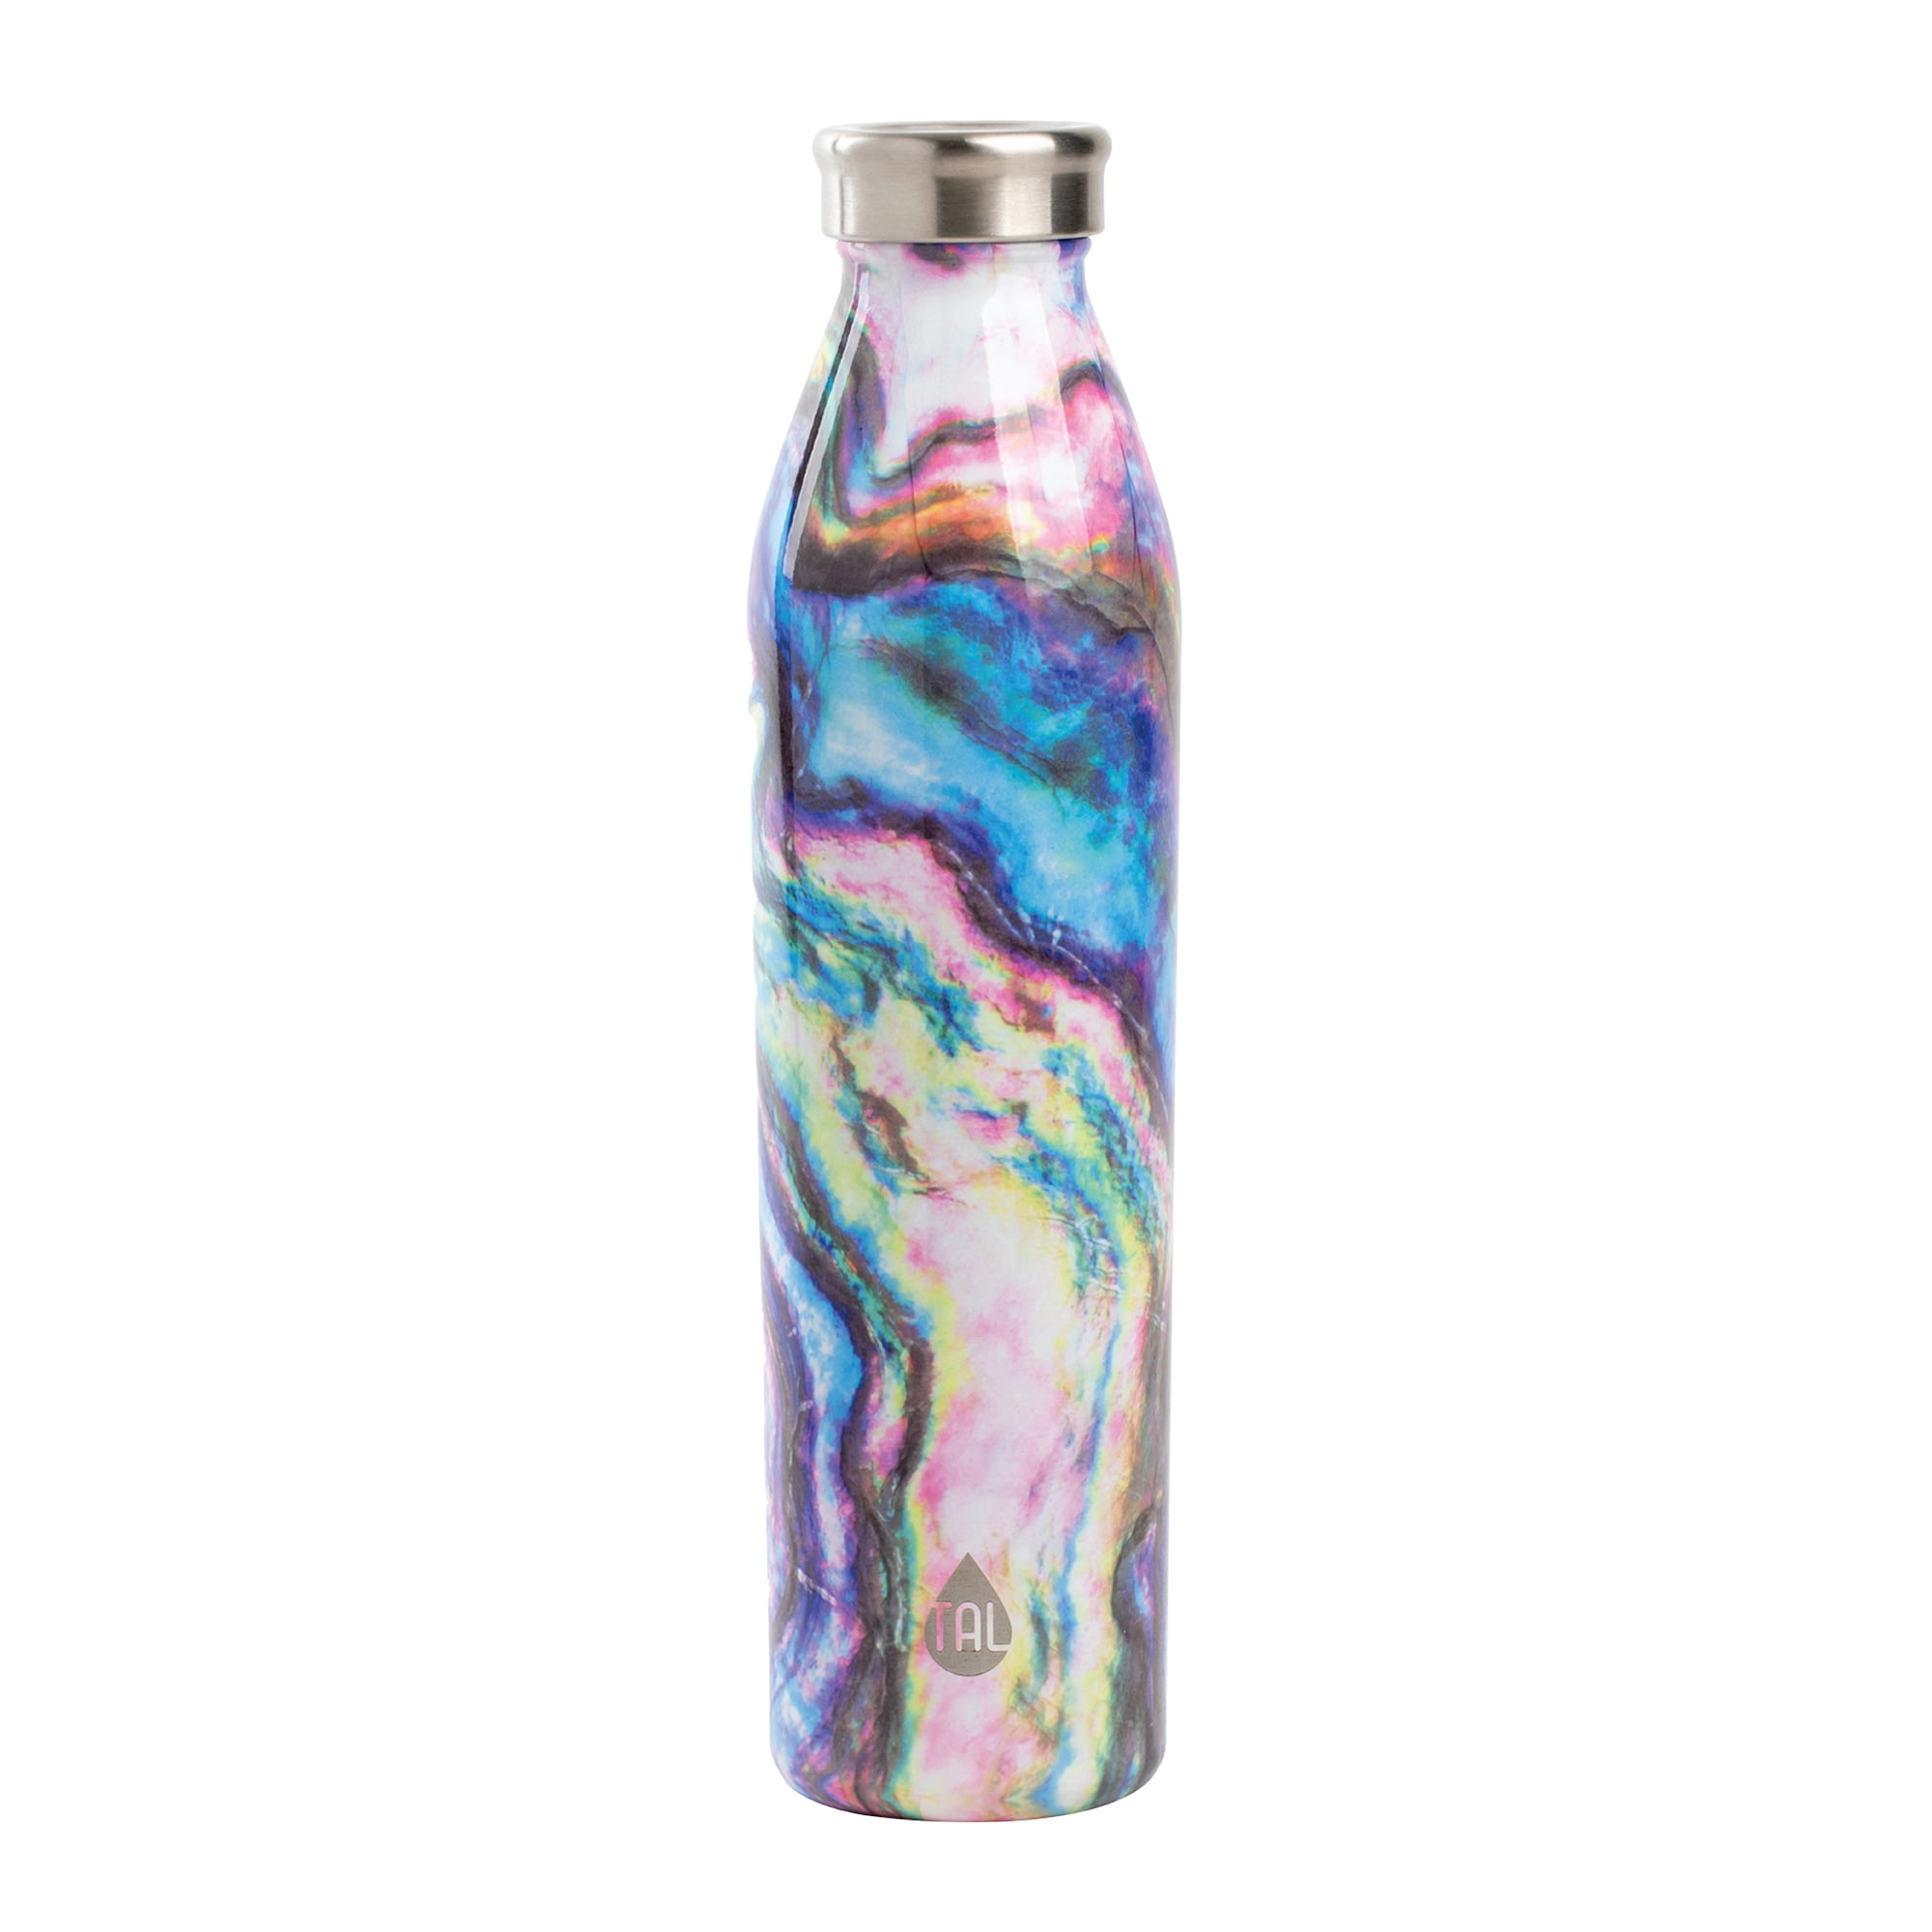 Tal 20 Oz Stainless Vacuum Insulated Modern Water Bottle, Leopard 